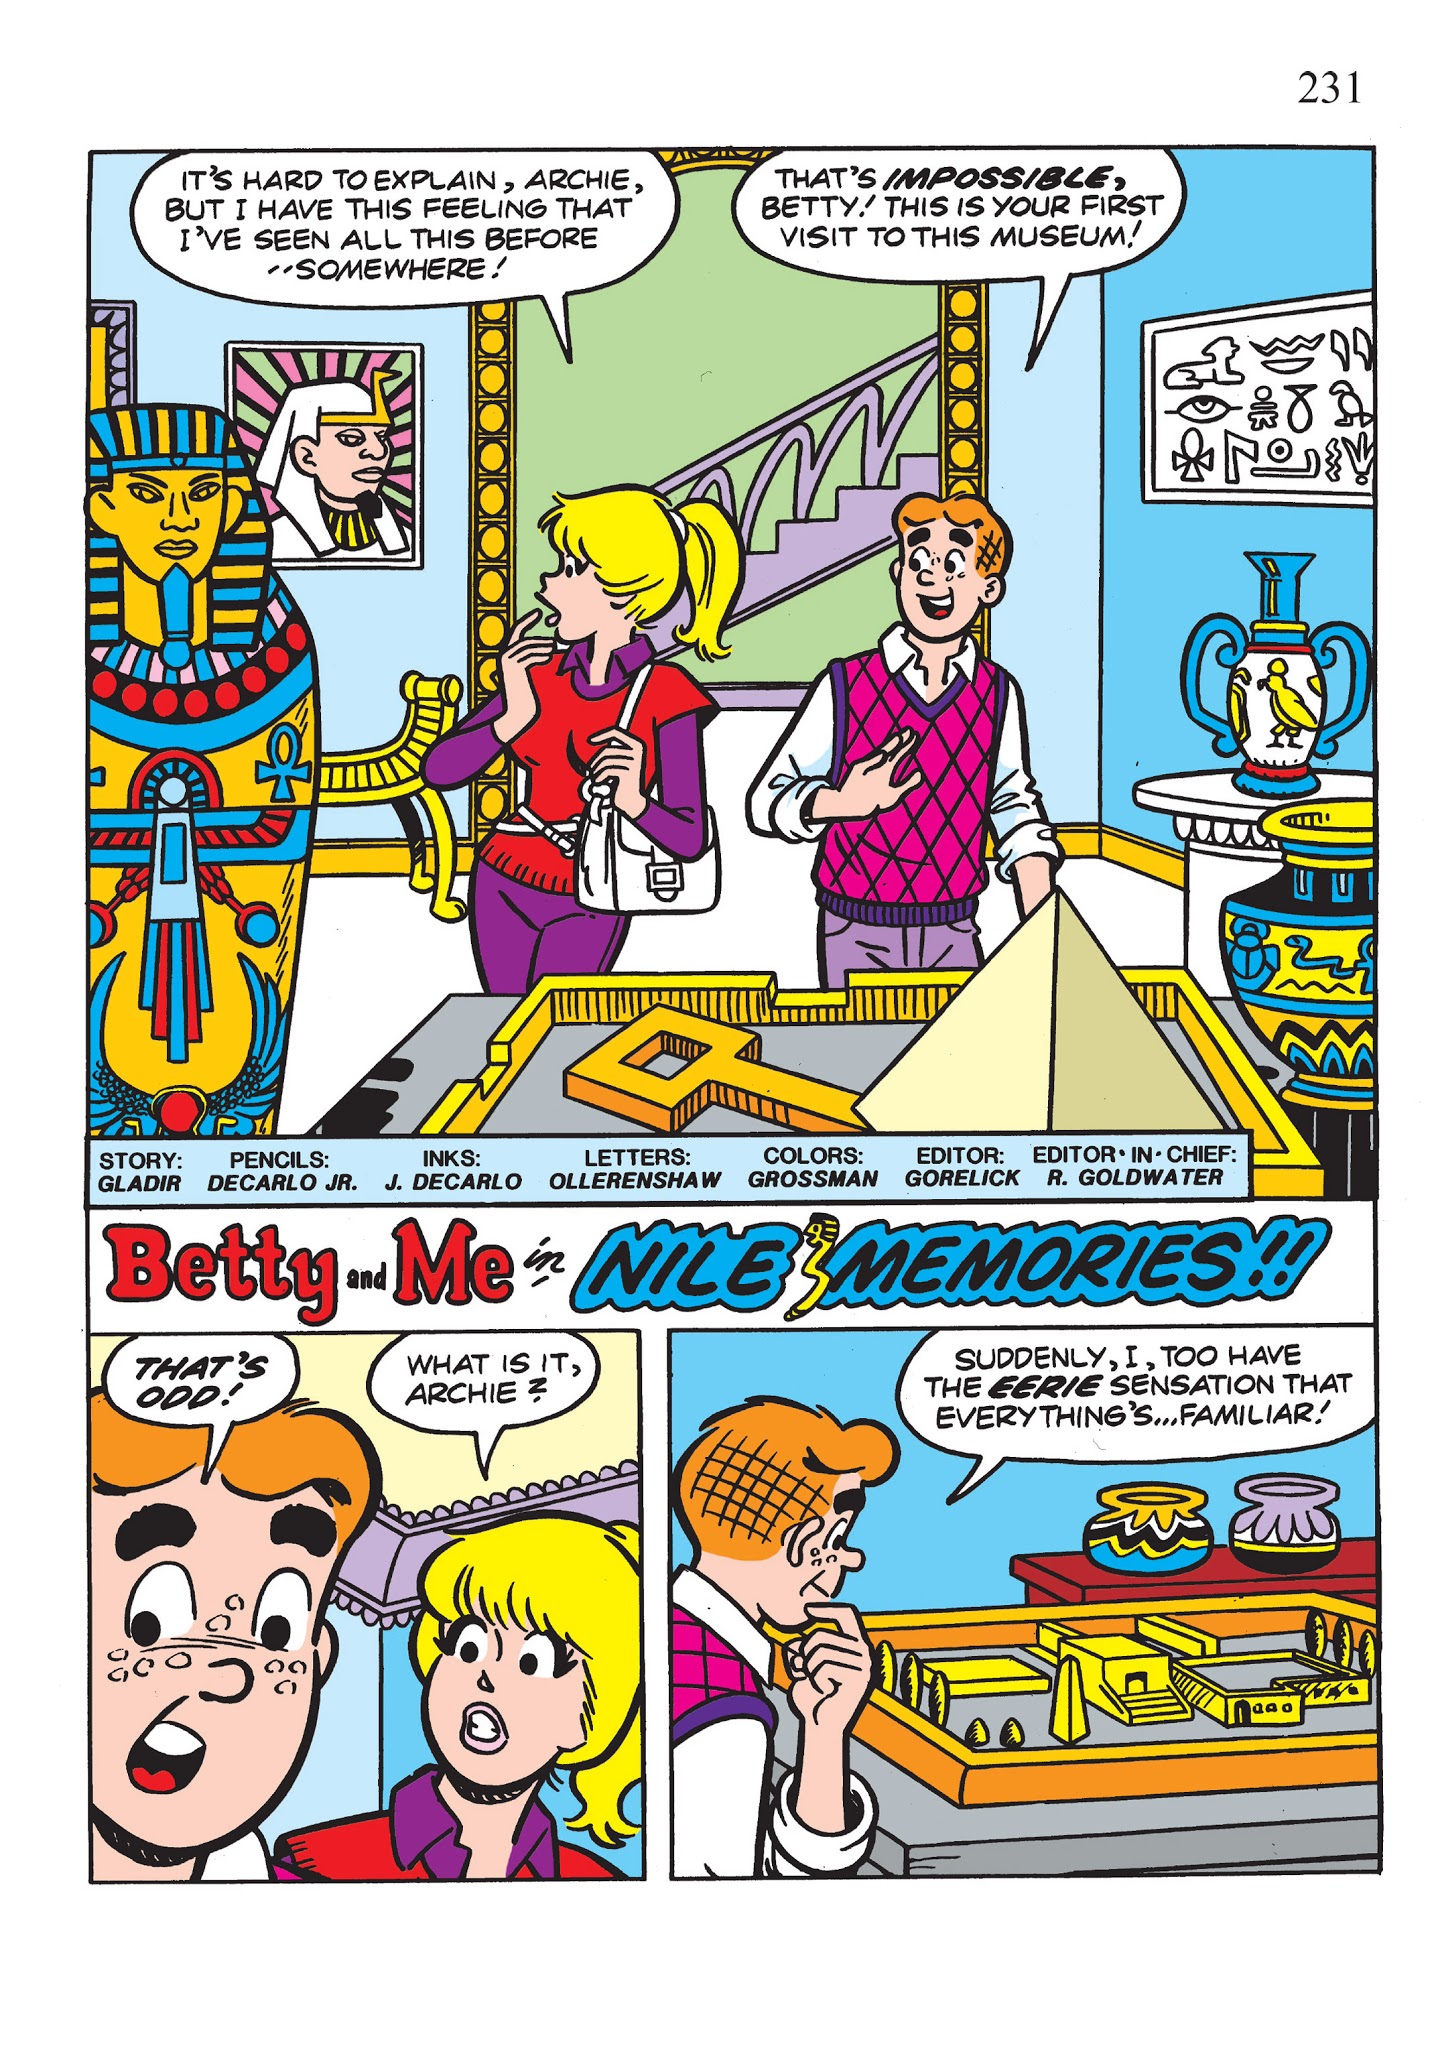 Read online The Best of Archie Comics: Betty & Veronica comic -  Issue # TPB - 232